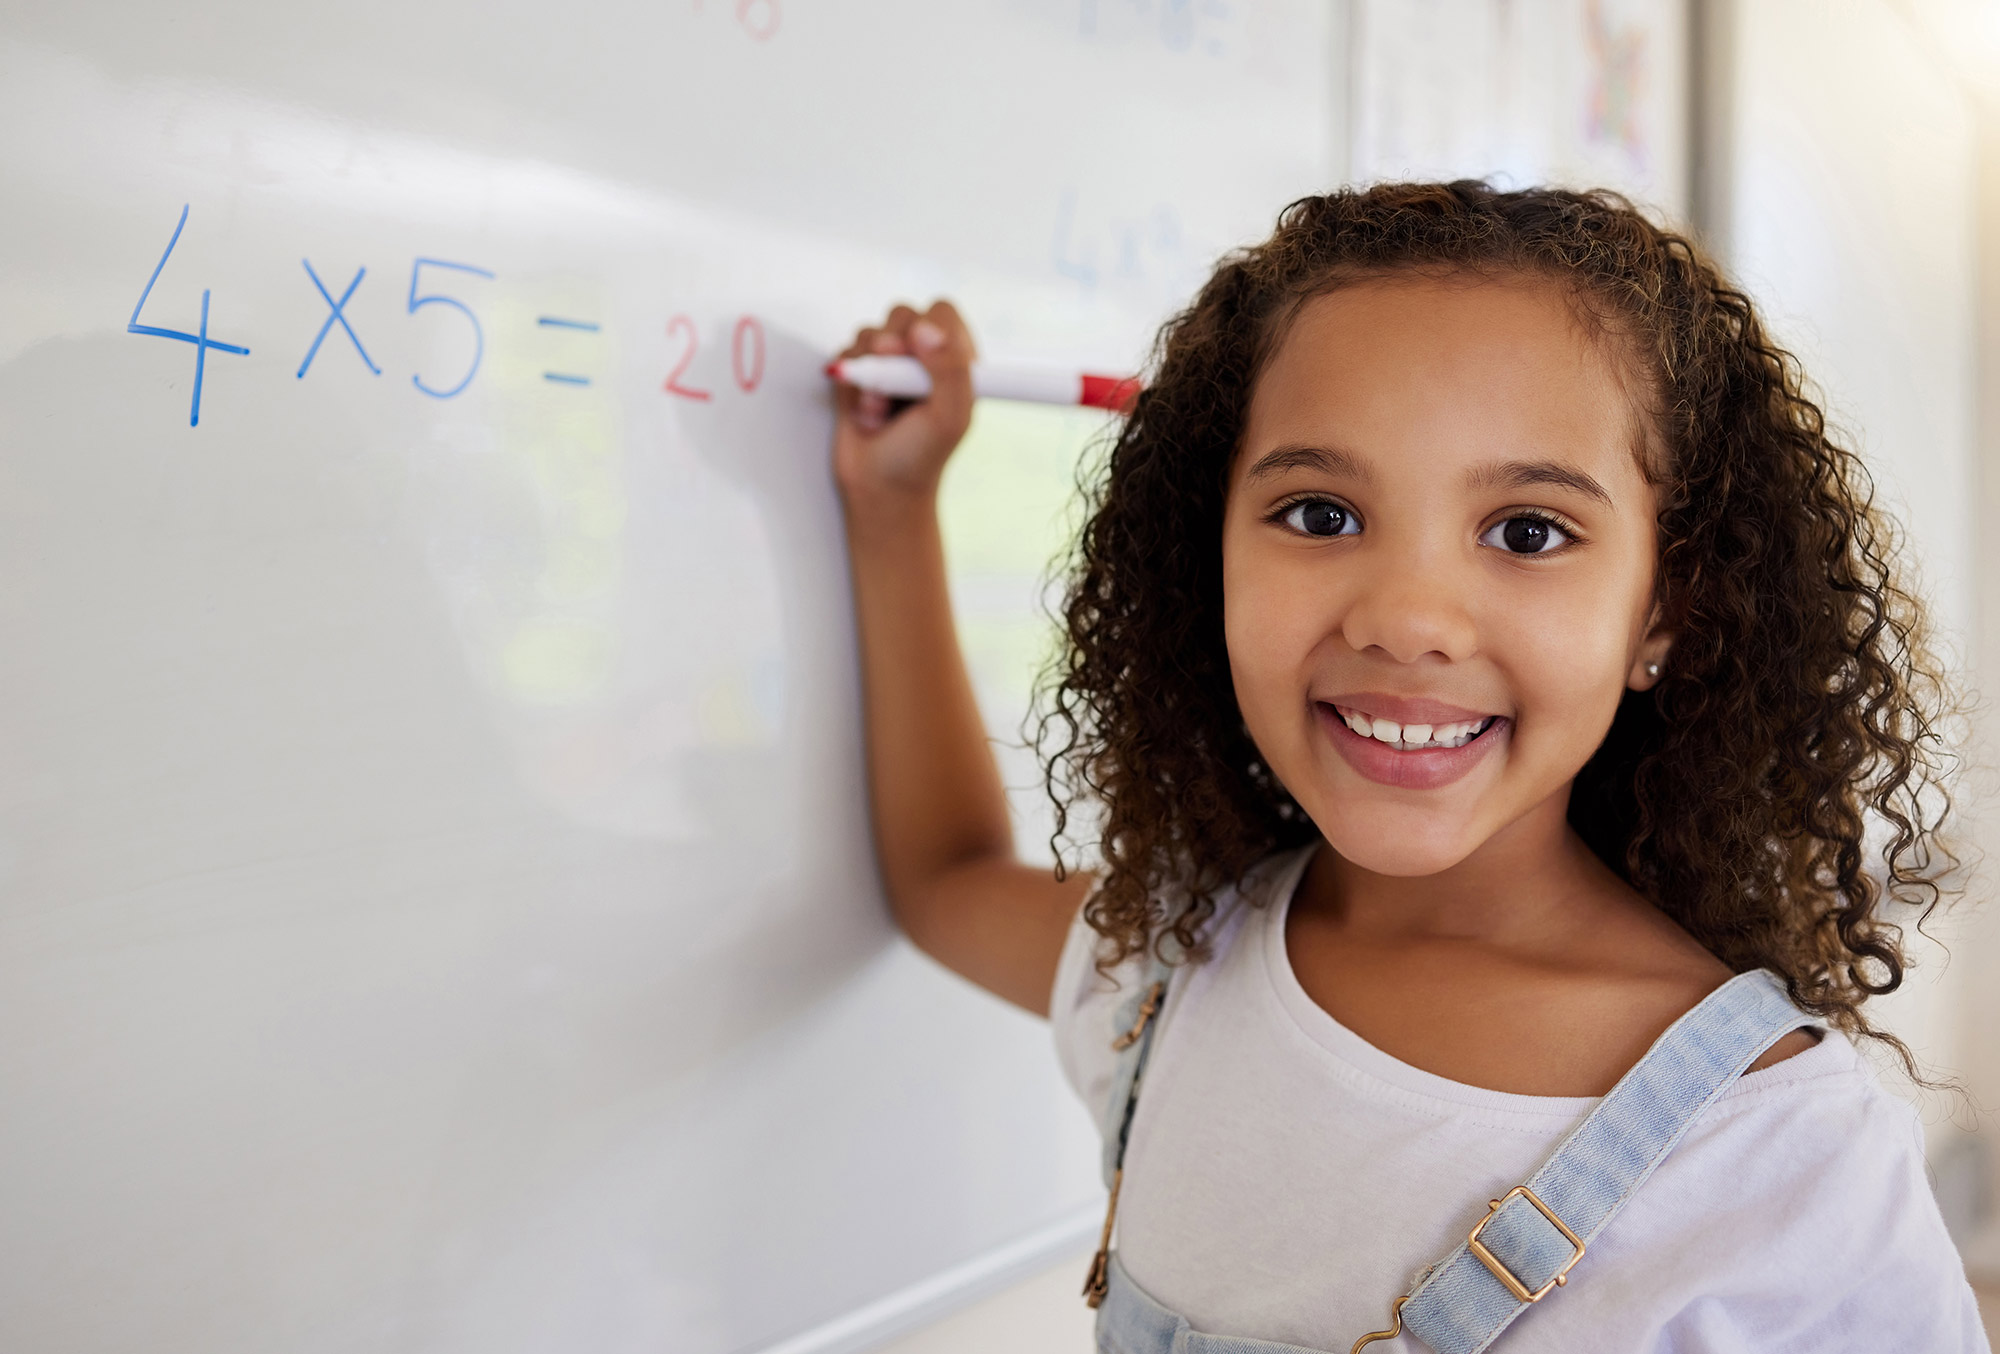 little girl writing a math problem on whiteboard and smiling